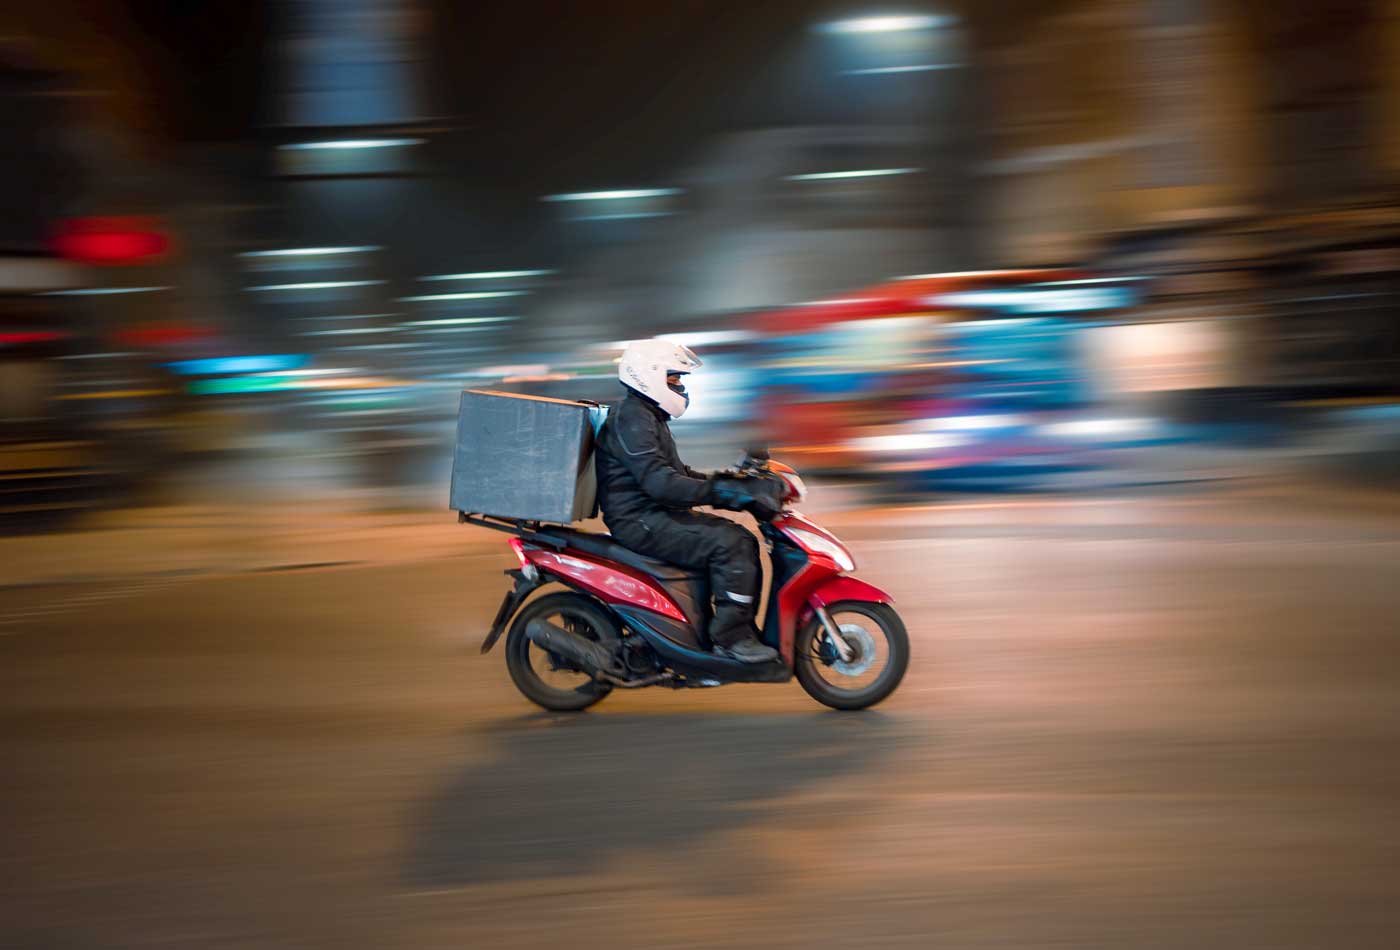 How to start a delivery business - Shows a courier on a motorcycle